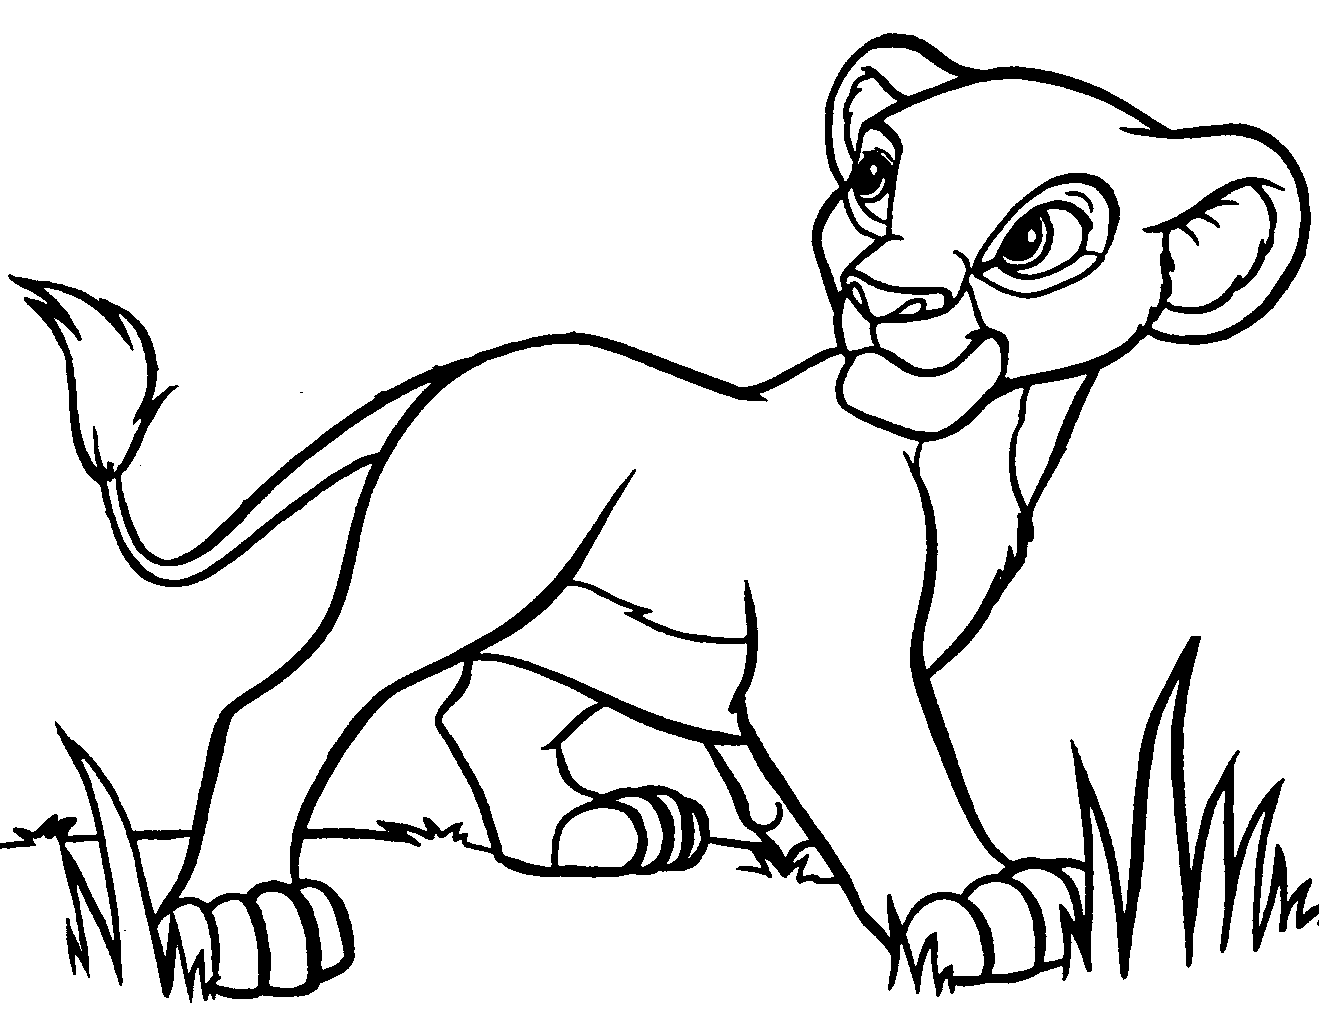 Lion black and white lion kin - Lion Black And White Clipart